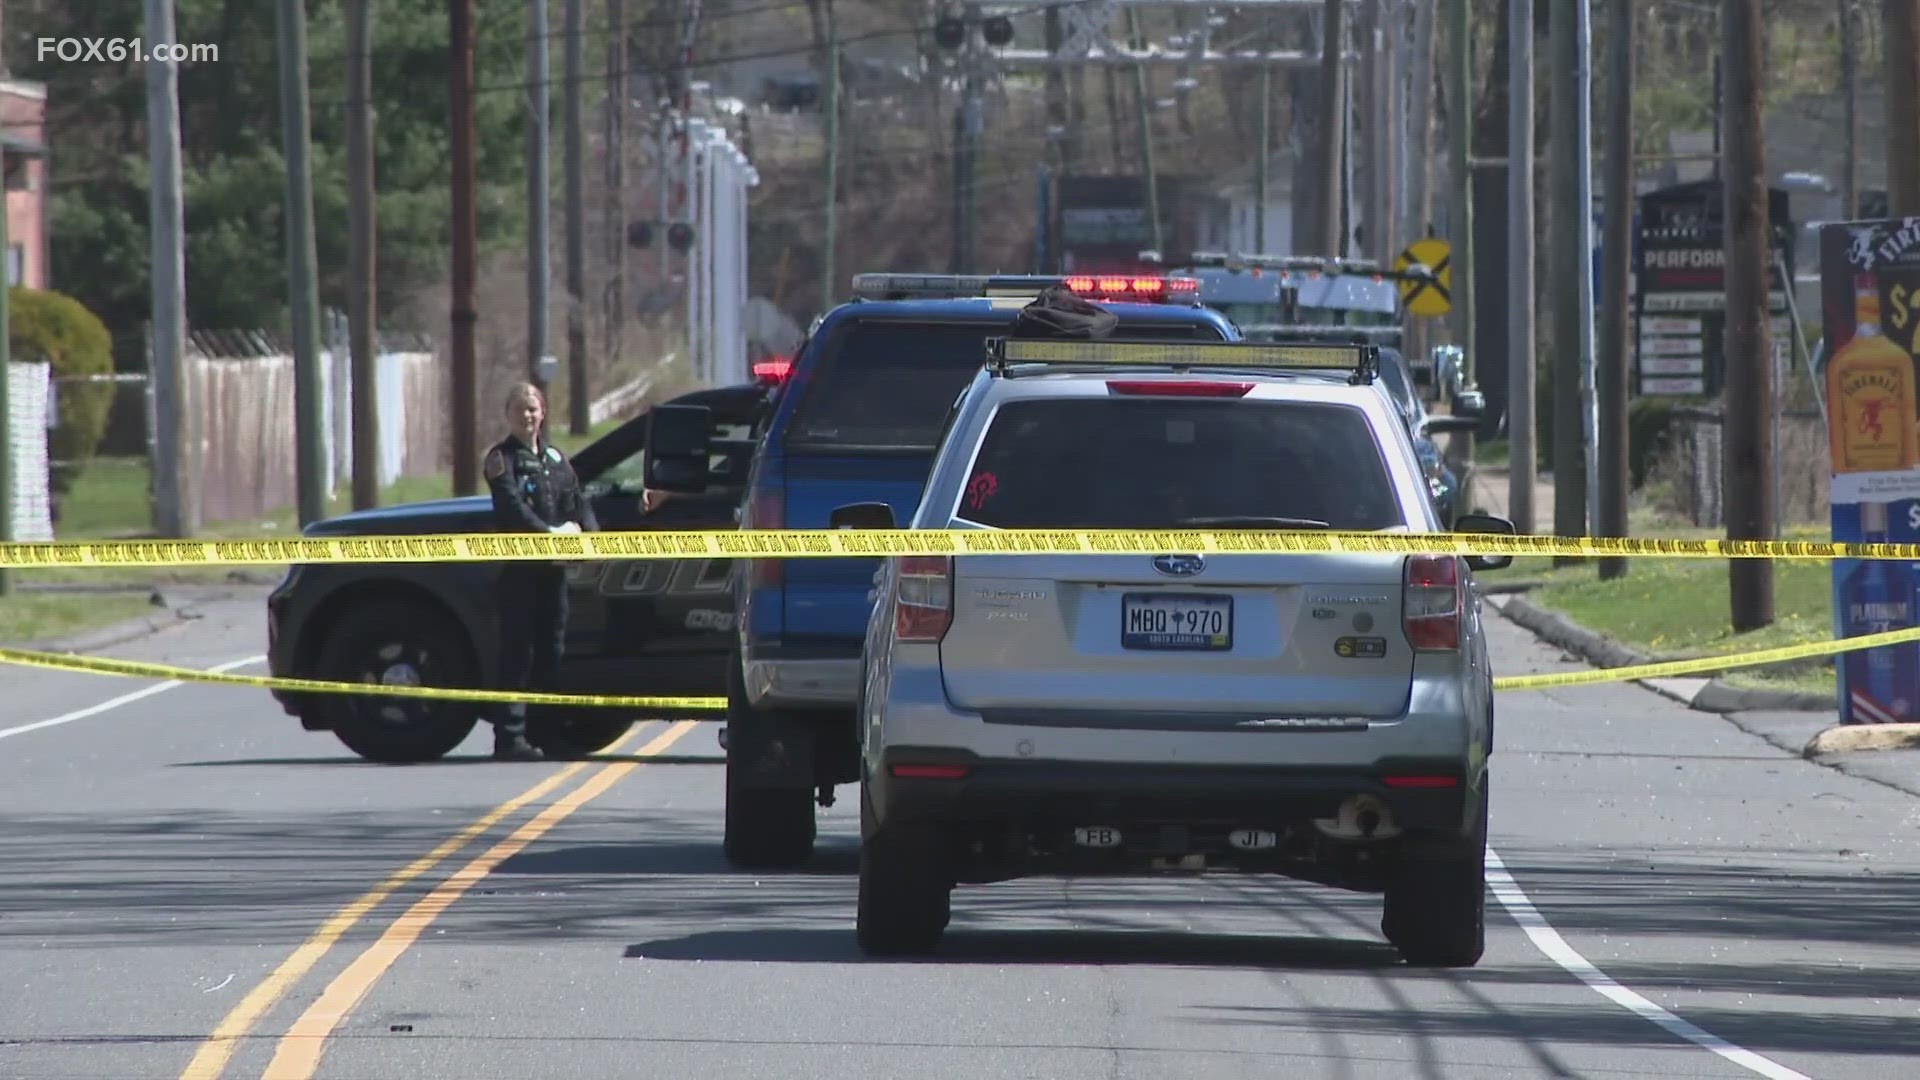 The shooting happened around 6 a.m. Tuesday causing part of Broad Street to be closed all morning.